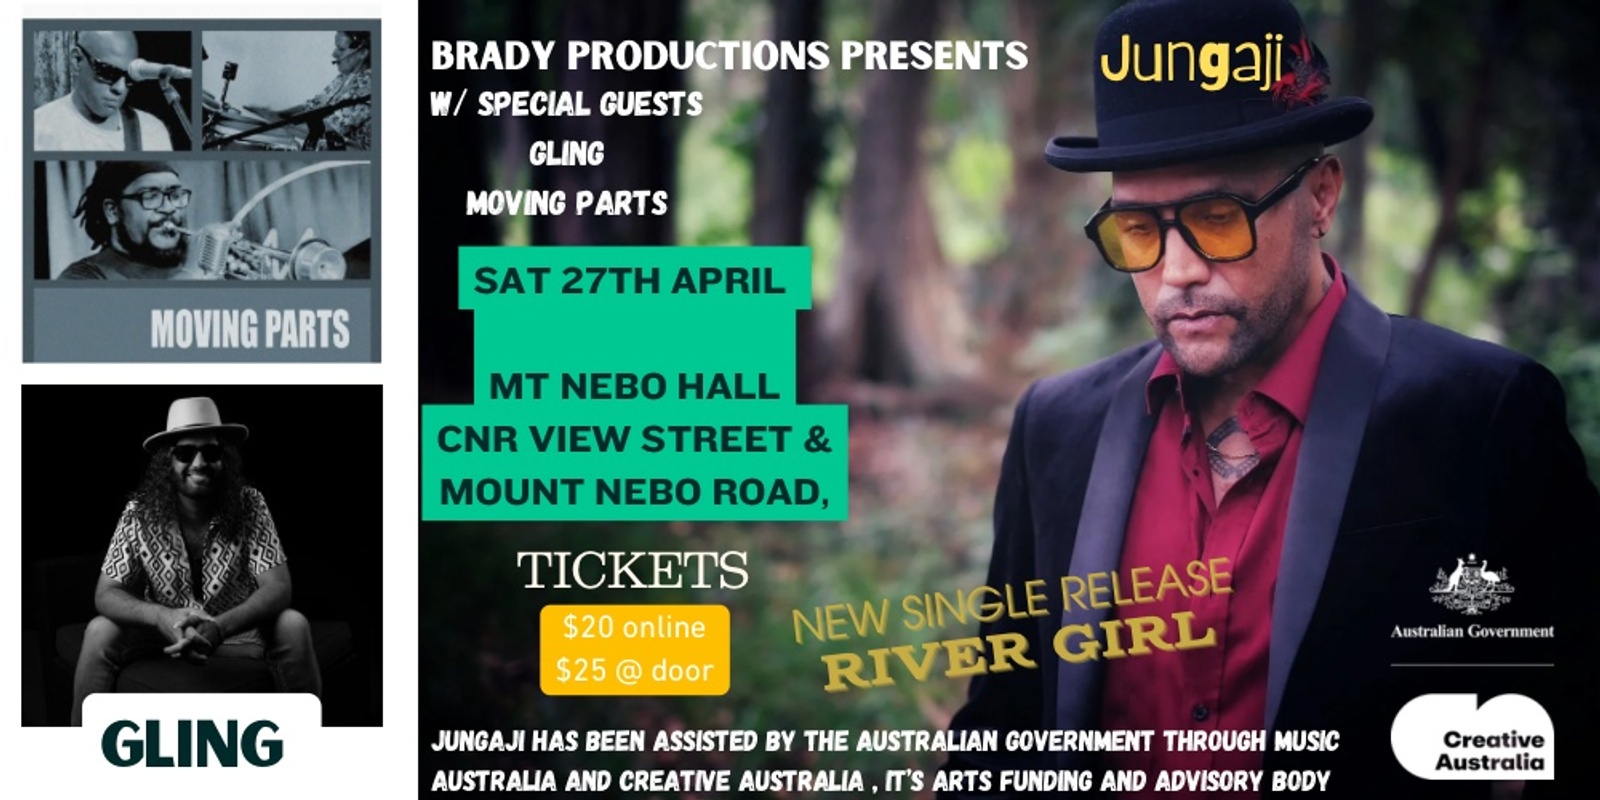 Banner image for Jungaji + River Girl release w/Moving Parts & Gling - Mt Nebo Hall